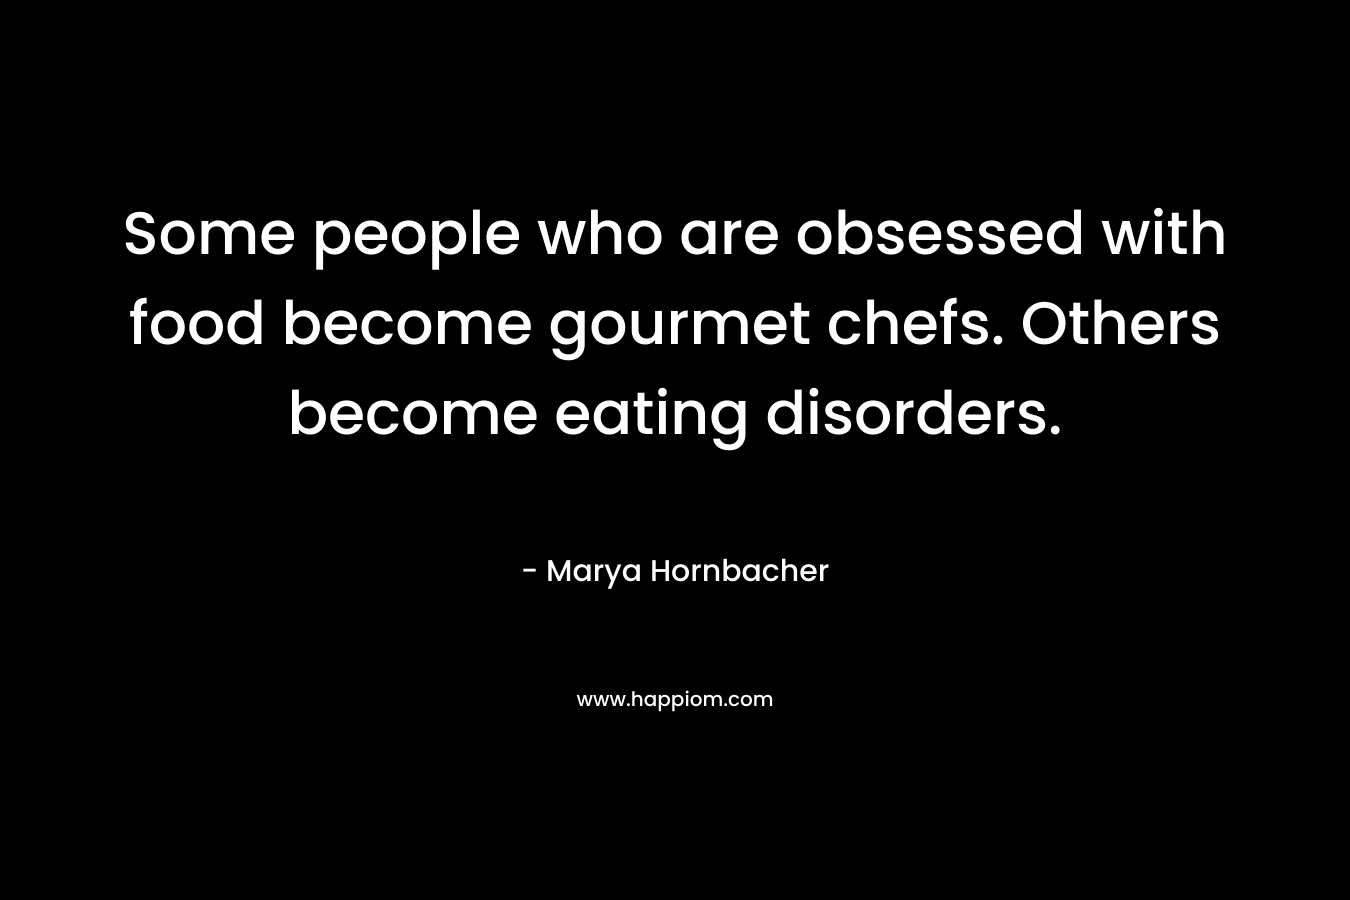 Some people who are obsessed with food become gourmet chefs. Others become eating disorders.